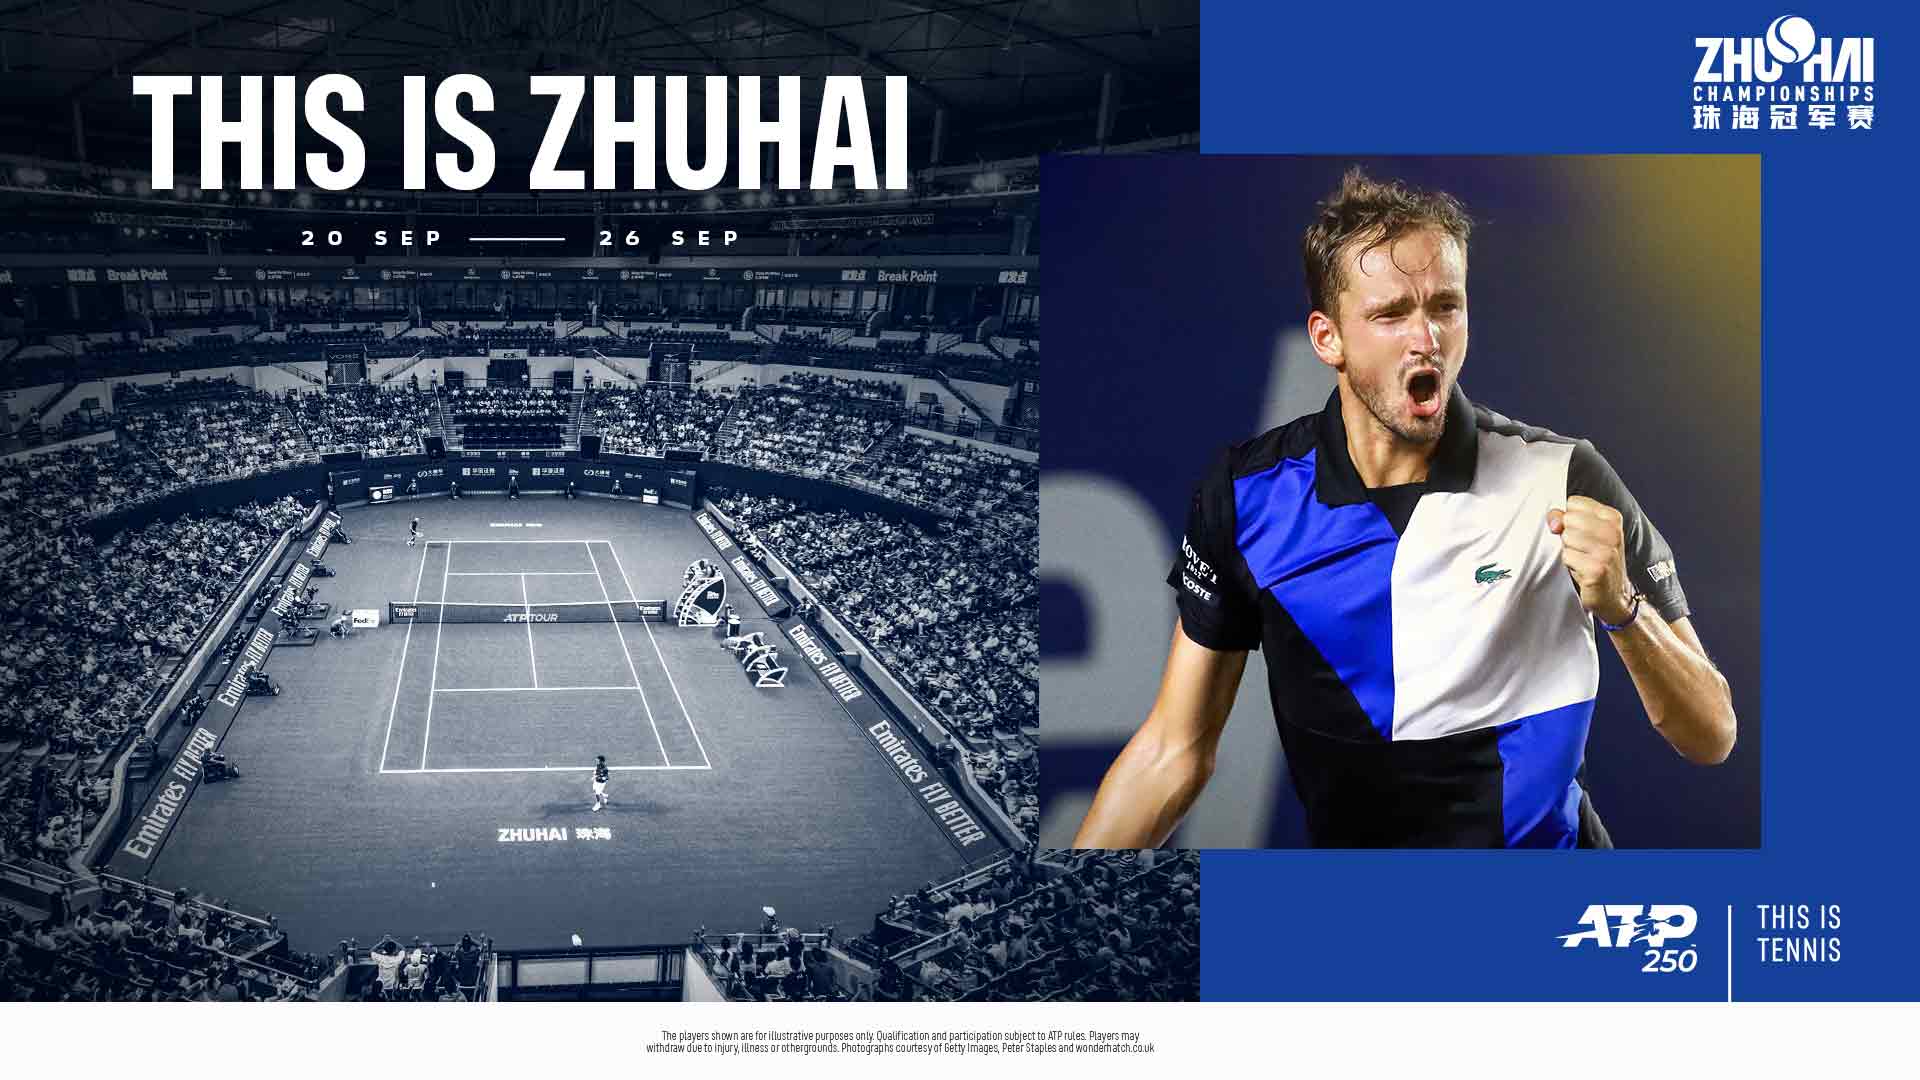 Daniil Medvedev will compete at the ATP 250 event this year.